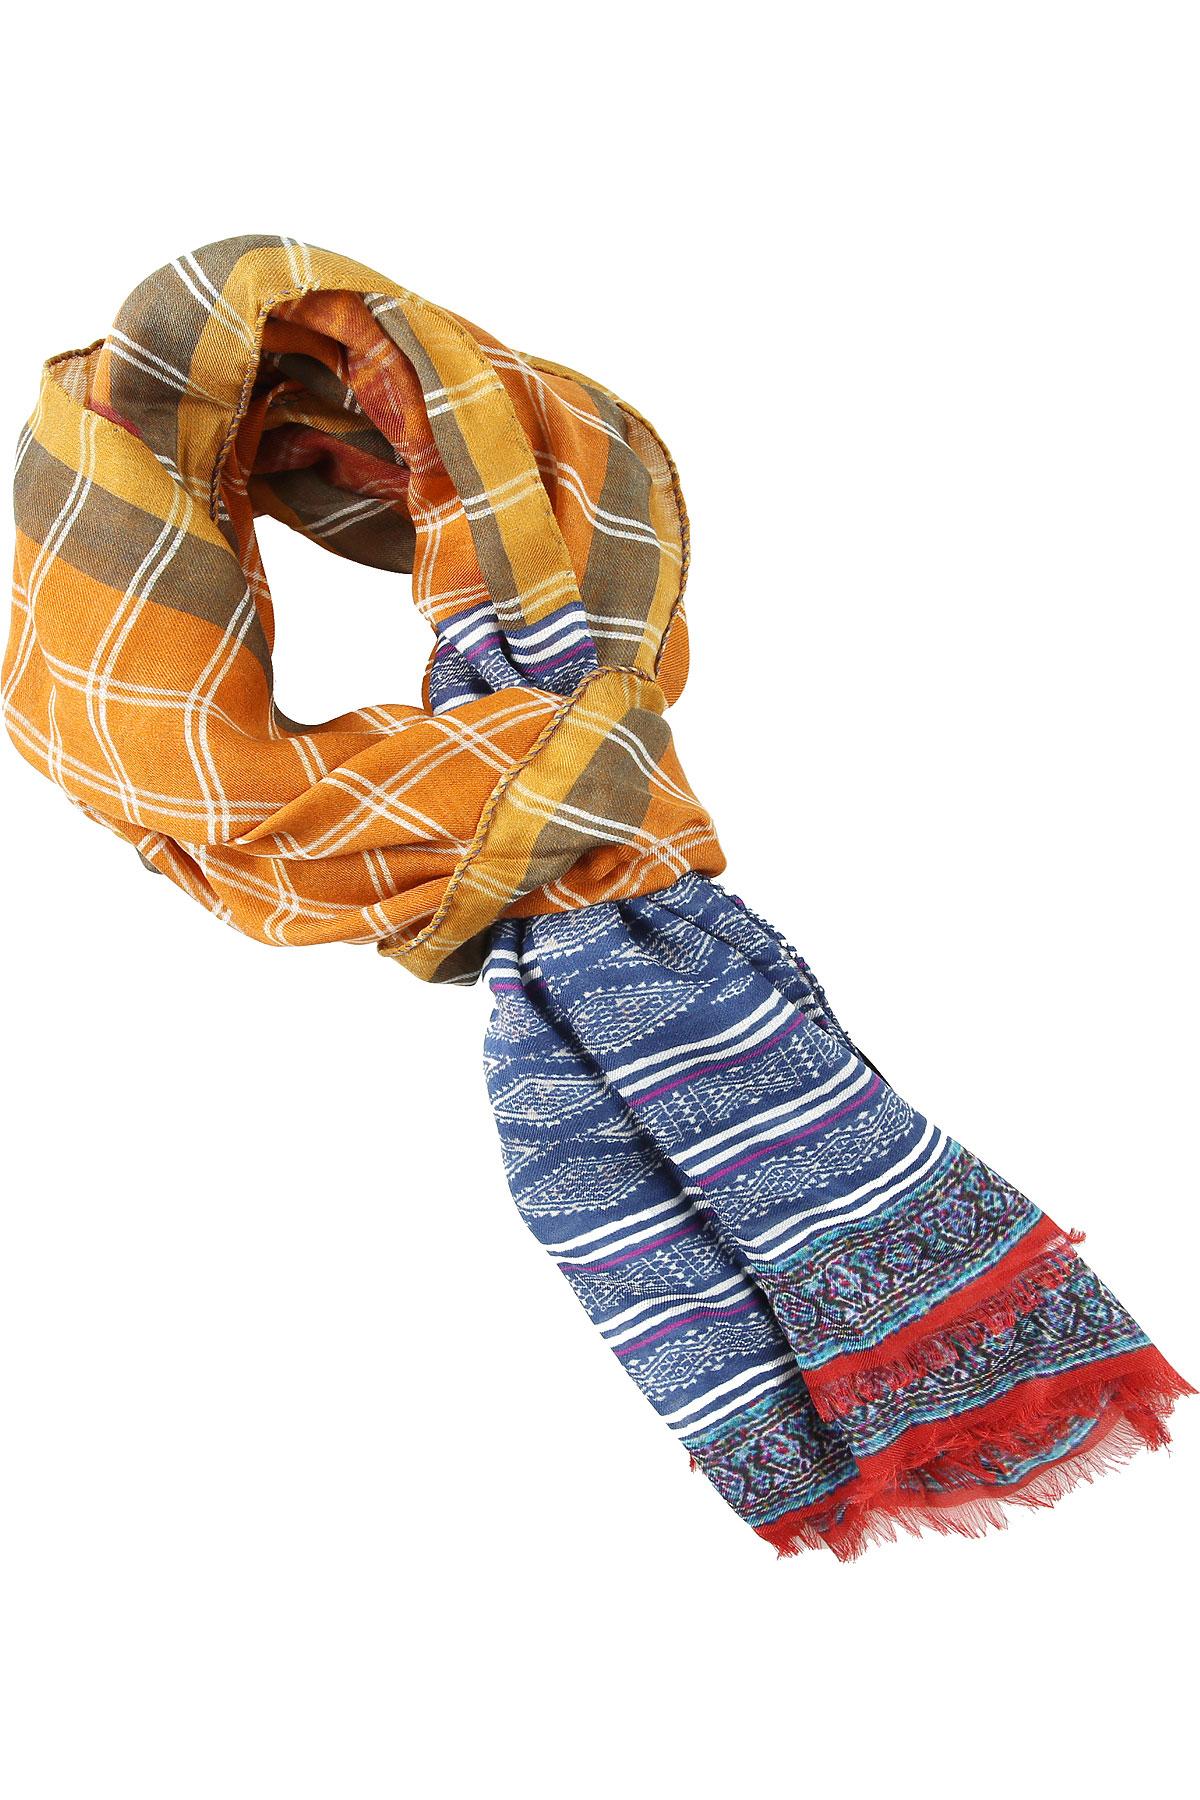 Etro Scarf For Men On Sale in Blue for Men - Lyst